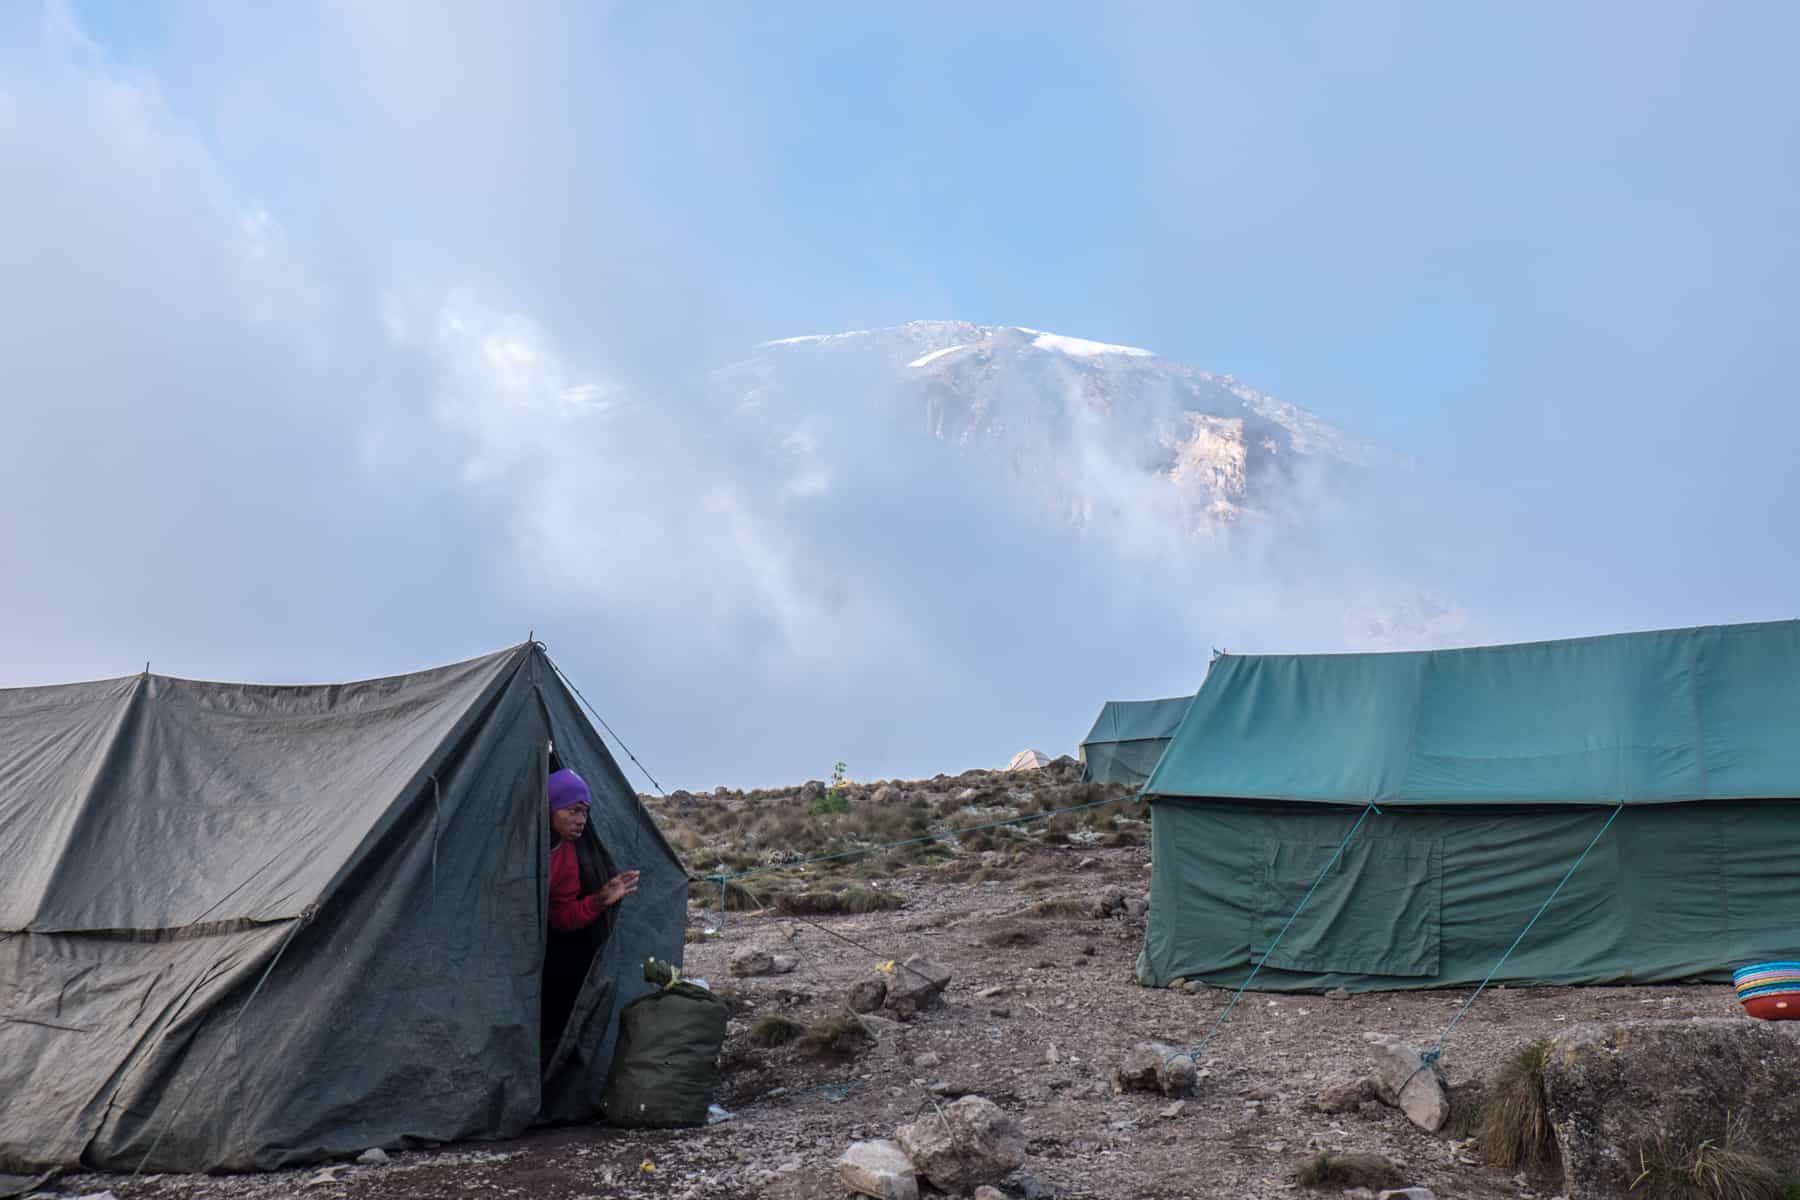 A man in a red jumper and purple hate peers out of a dark green tent as Kilimanjaro rises in the background, covered in mist